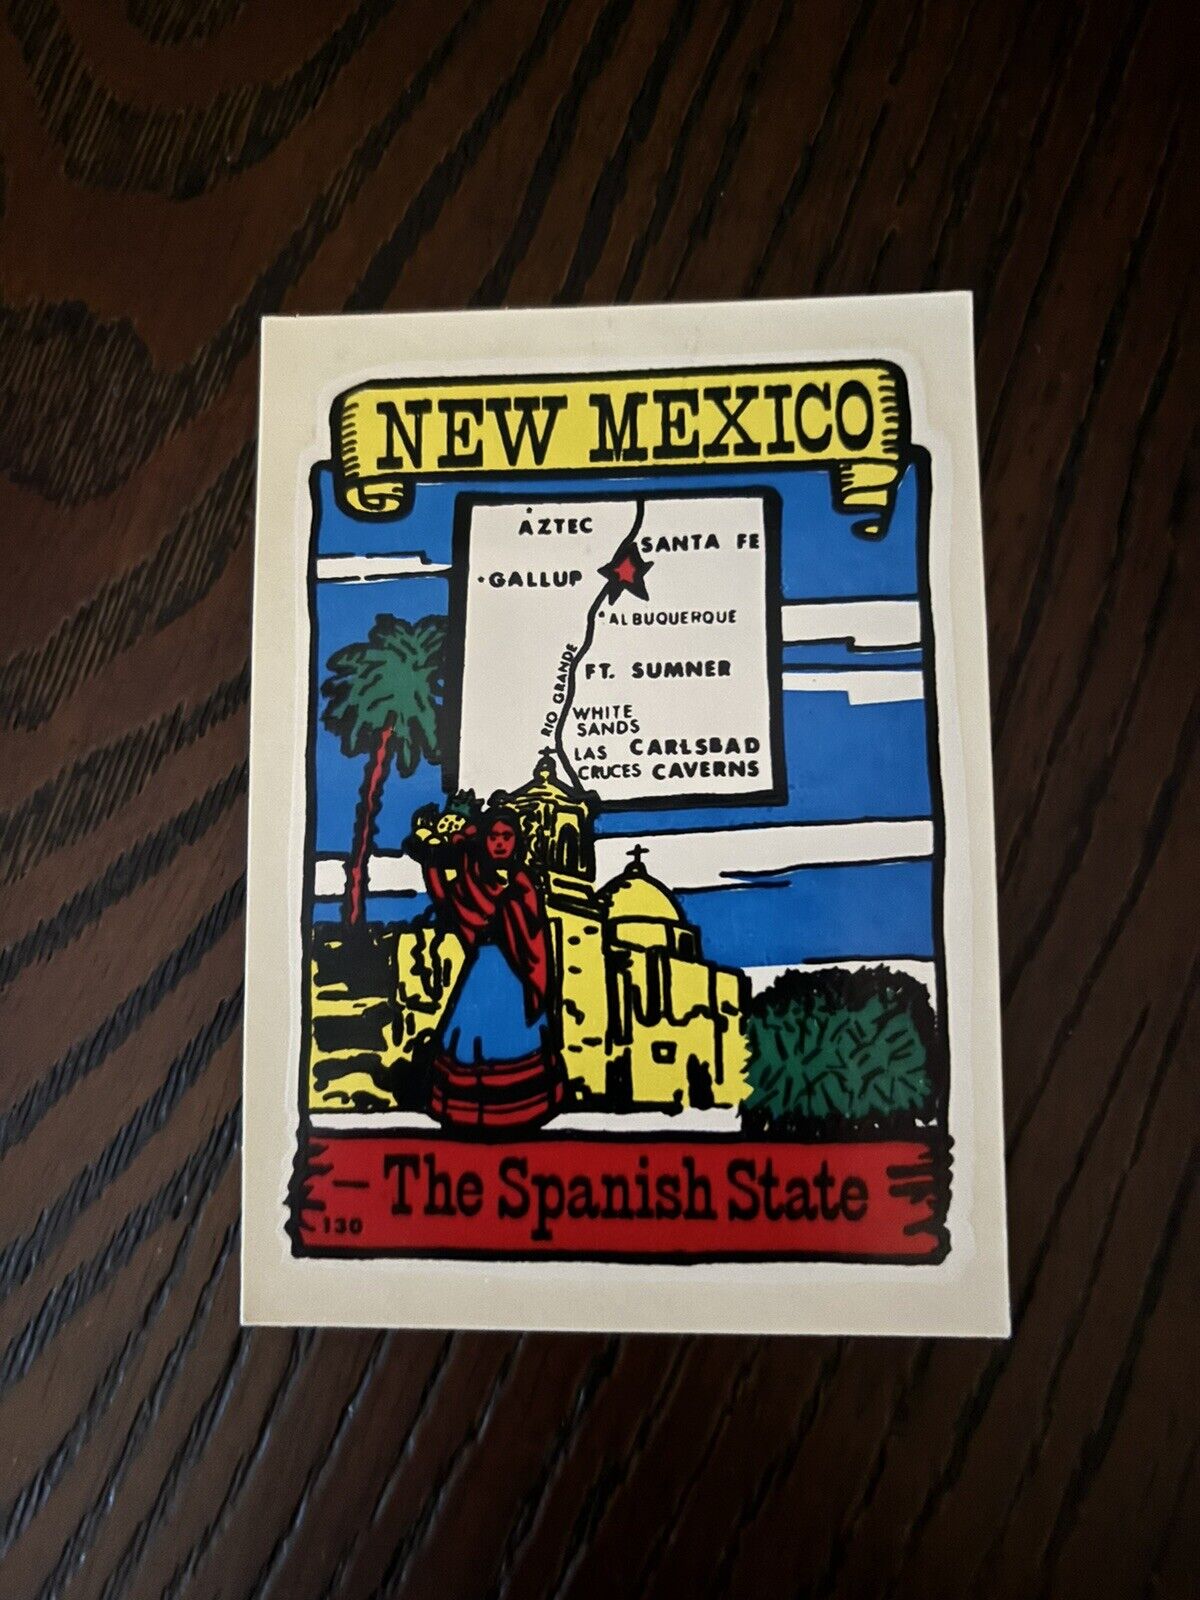 Vintage Souvenir Travel Decal NEW MEXICO “The Spanish State”